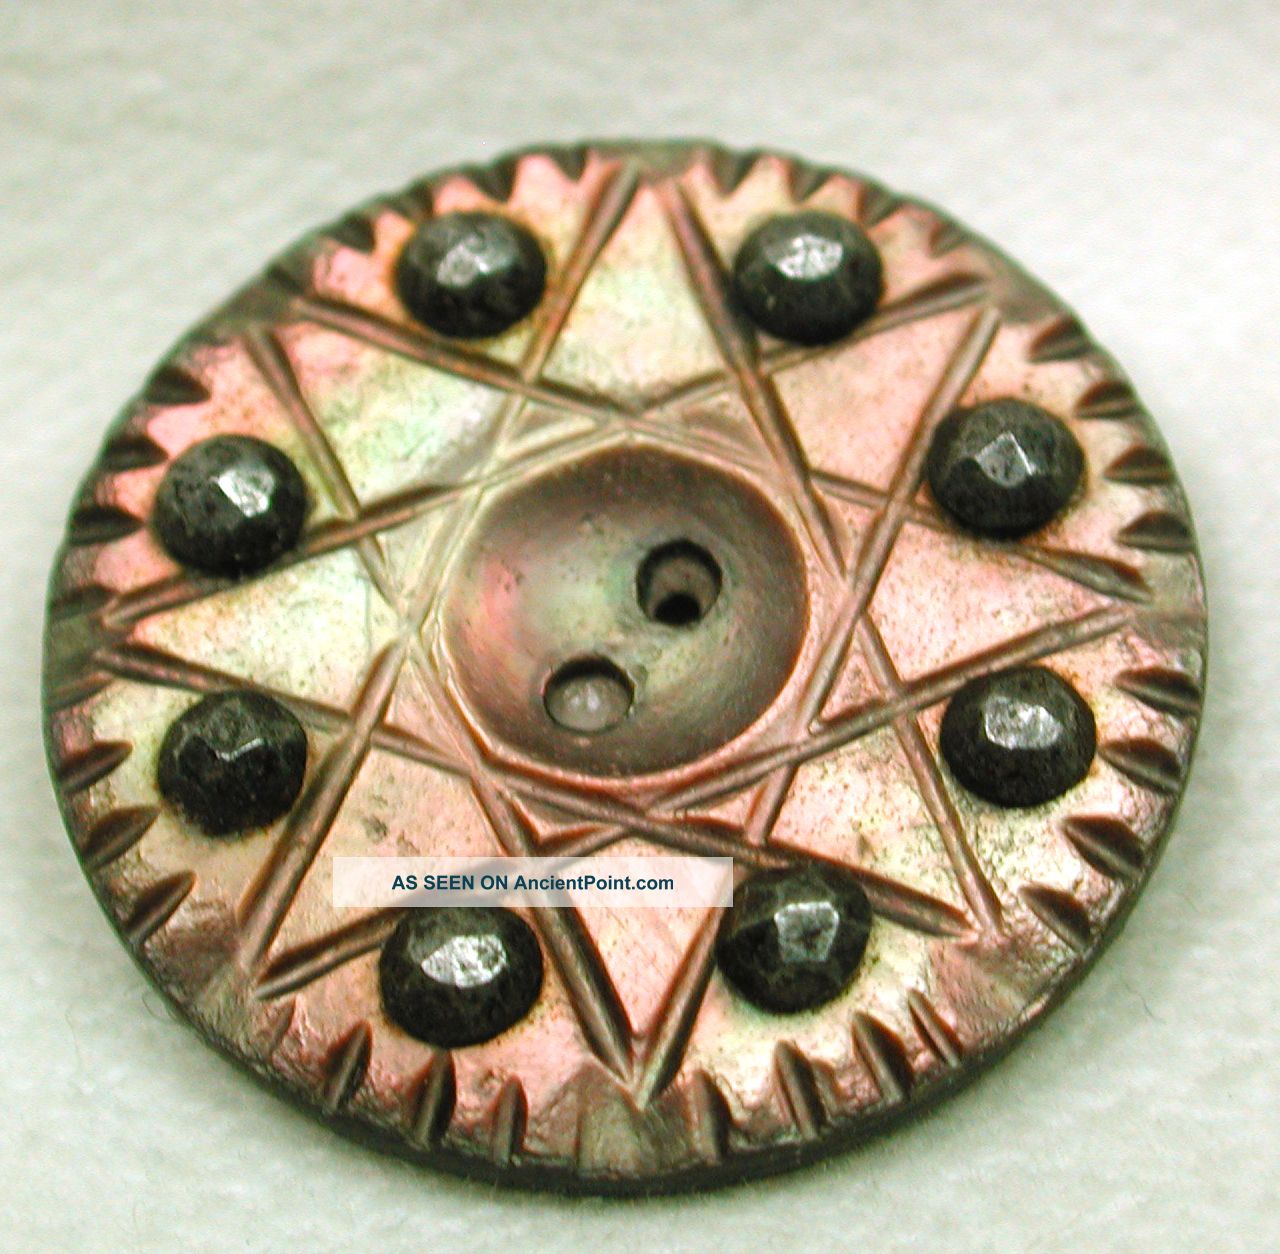 Antique Iridescent Shell Button Carved Star Design W/ Cut Steel Accents Buttons photo